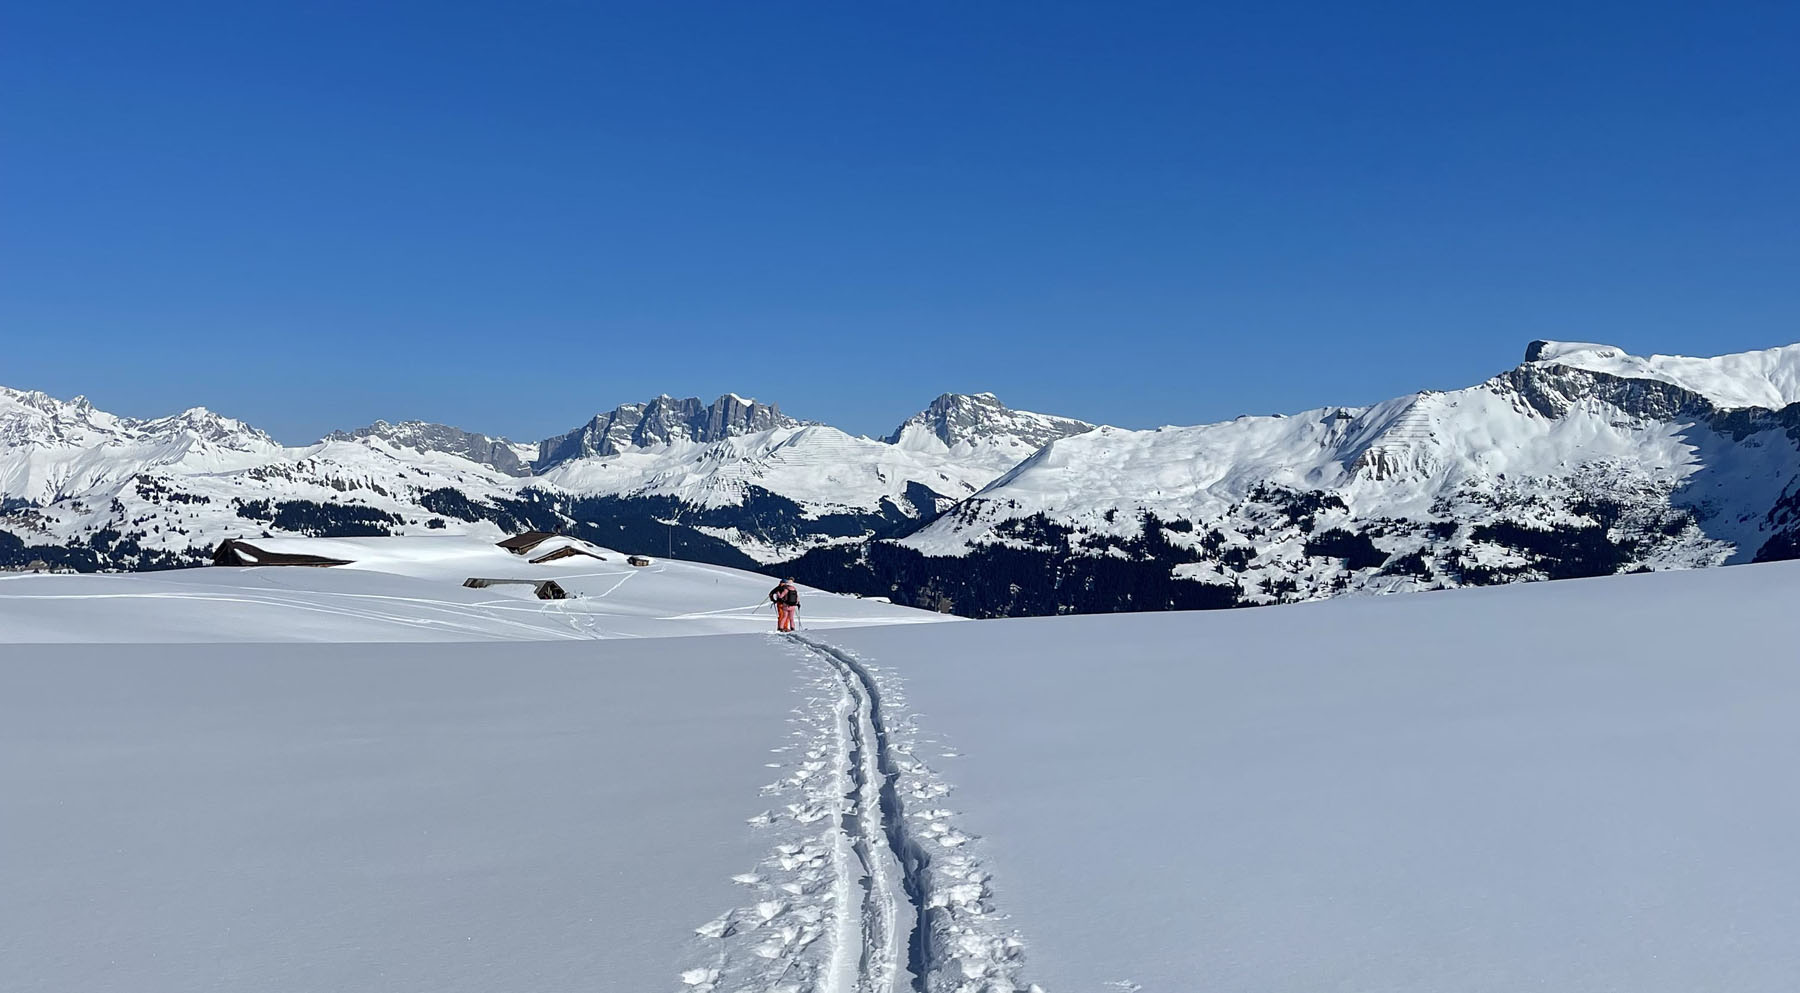 https://theluxuryvacationguide.com/wp-content/uploads/2022/03/1klosters-davos-off-piste42.jpg